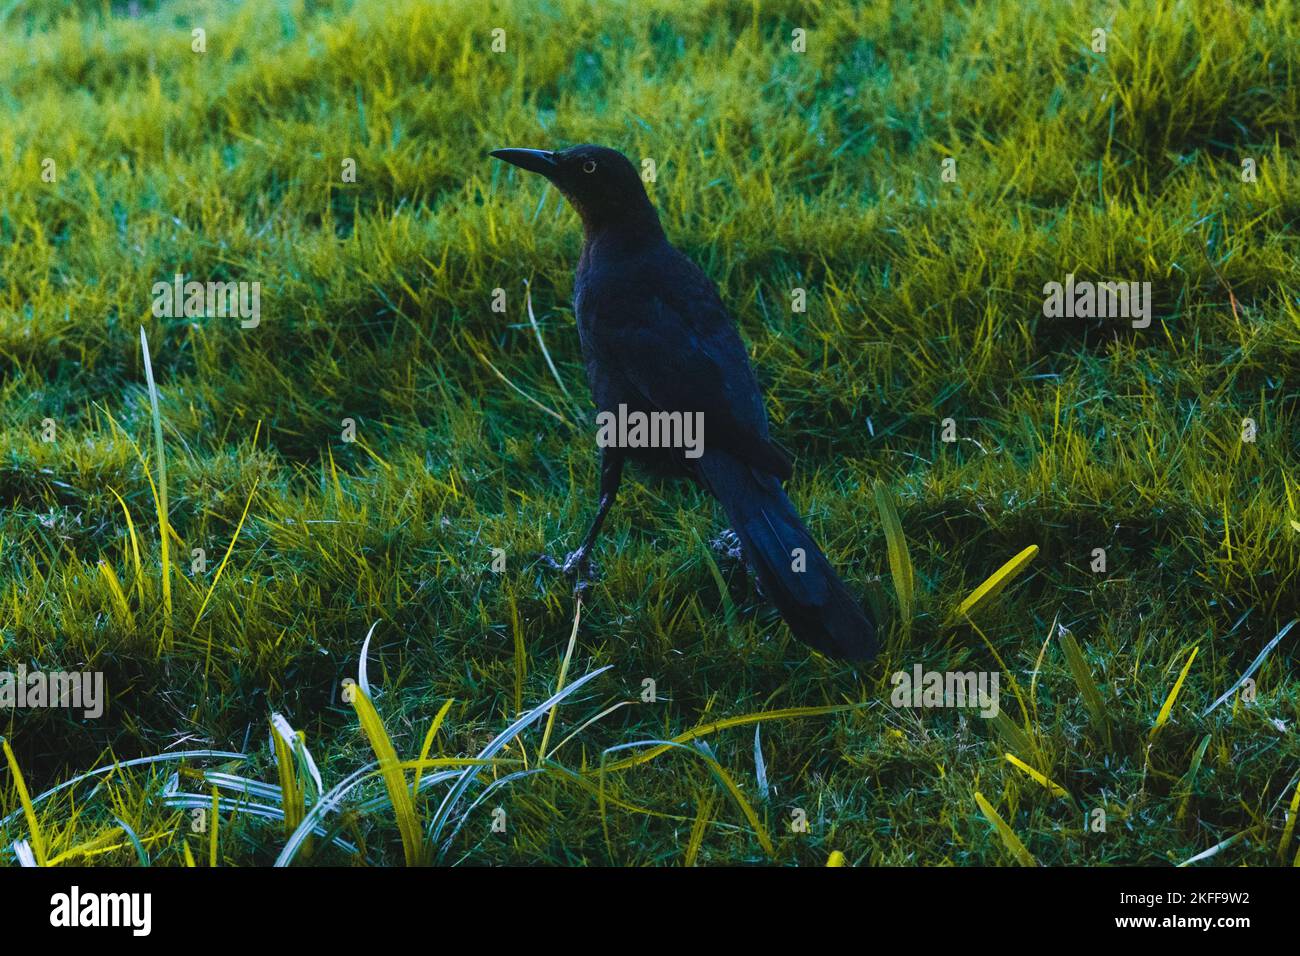 A Nicaraguan grackle standing on the green field and looking aside turned back to the camera Stock Photo